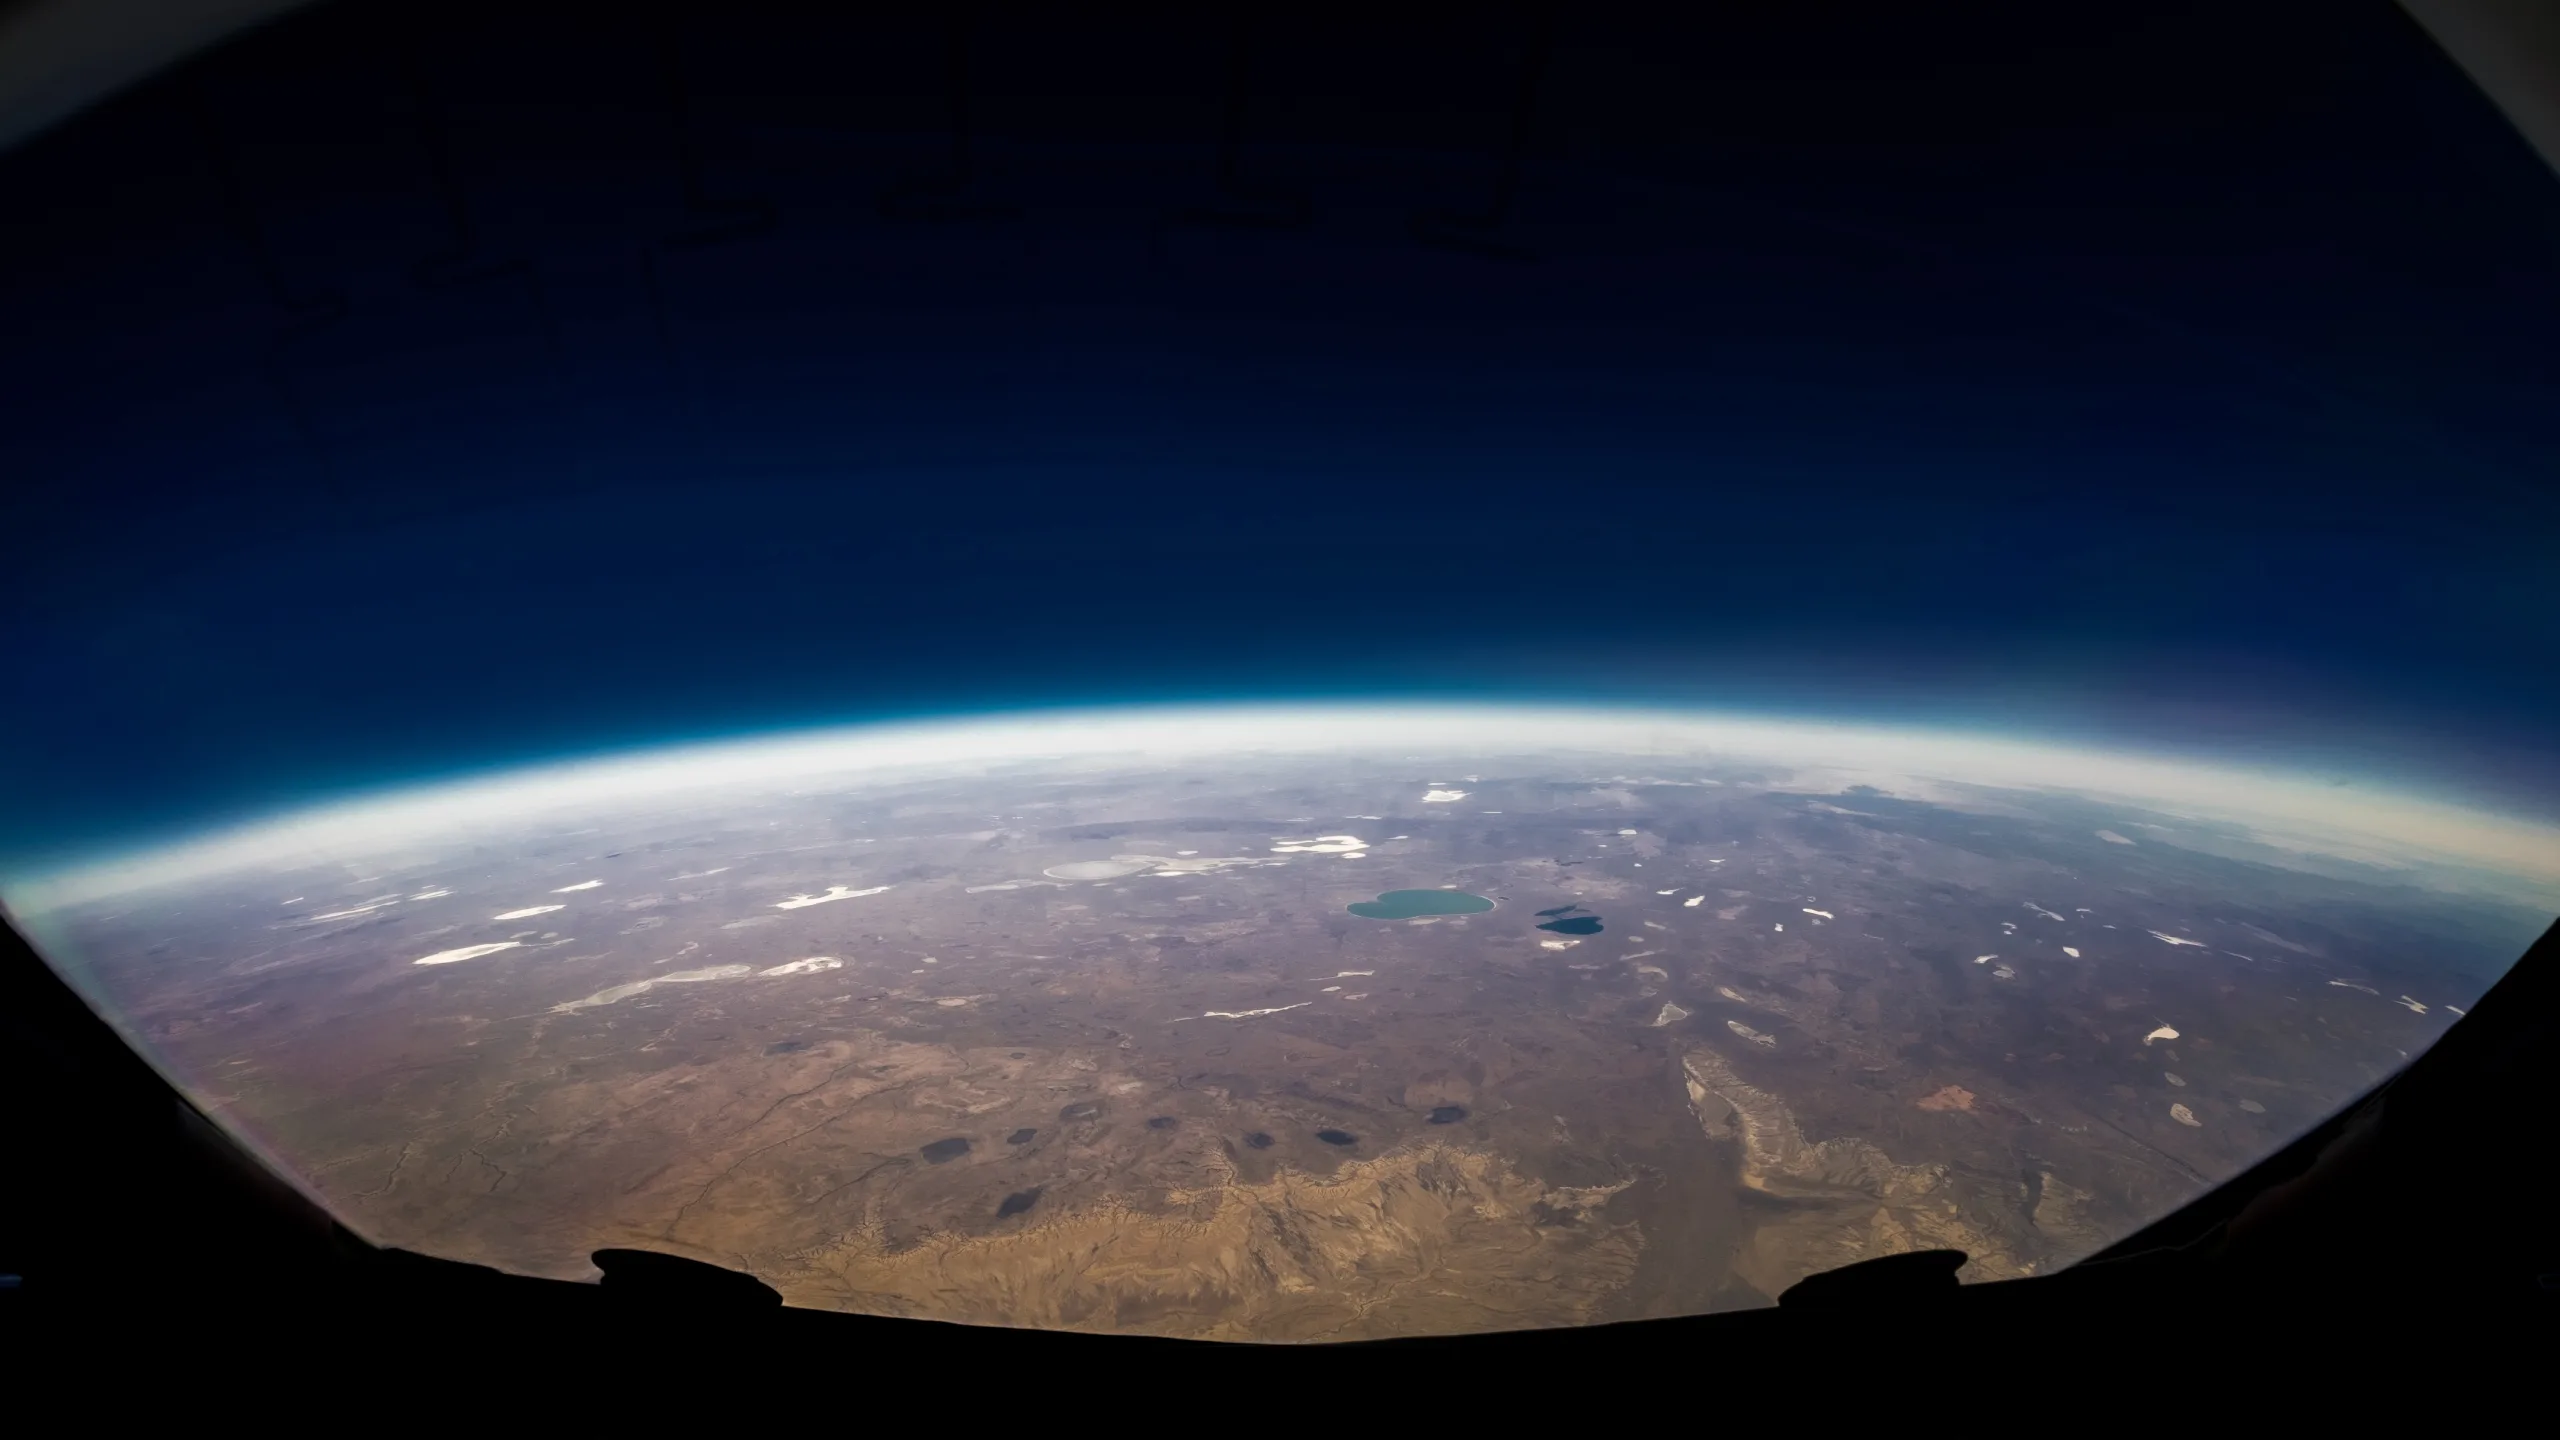 The glowing curvature of the planet seen from space